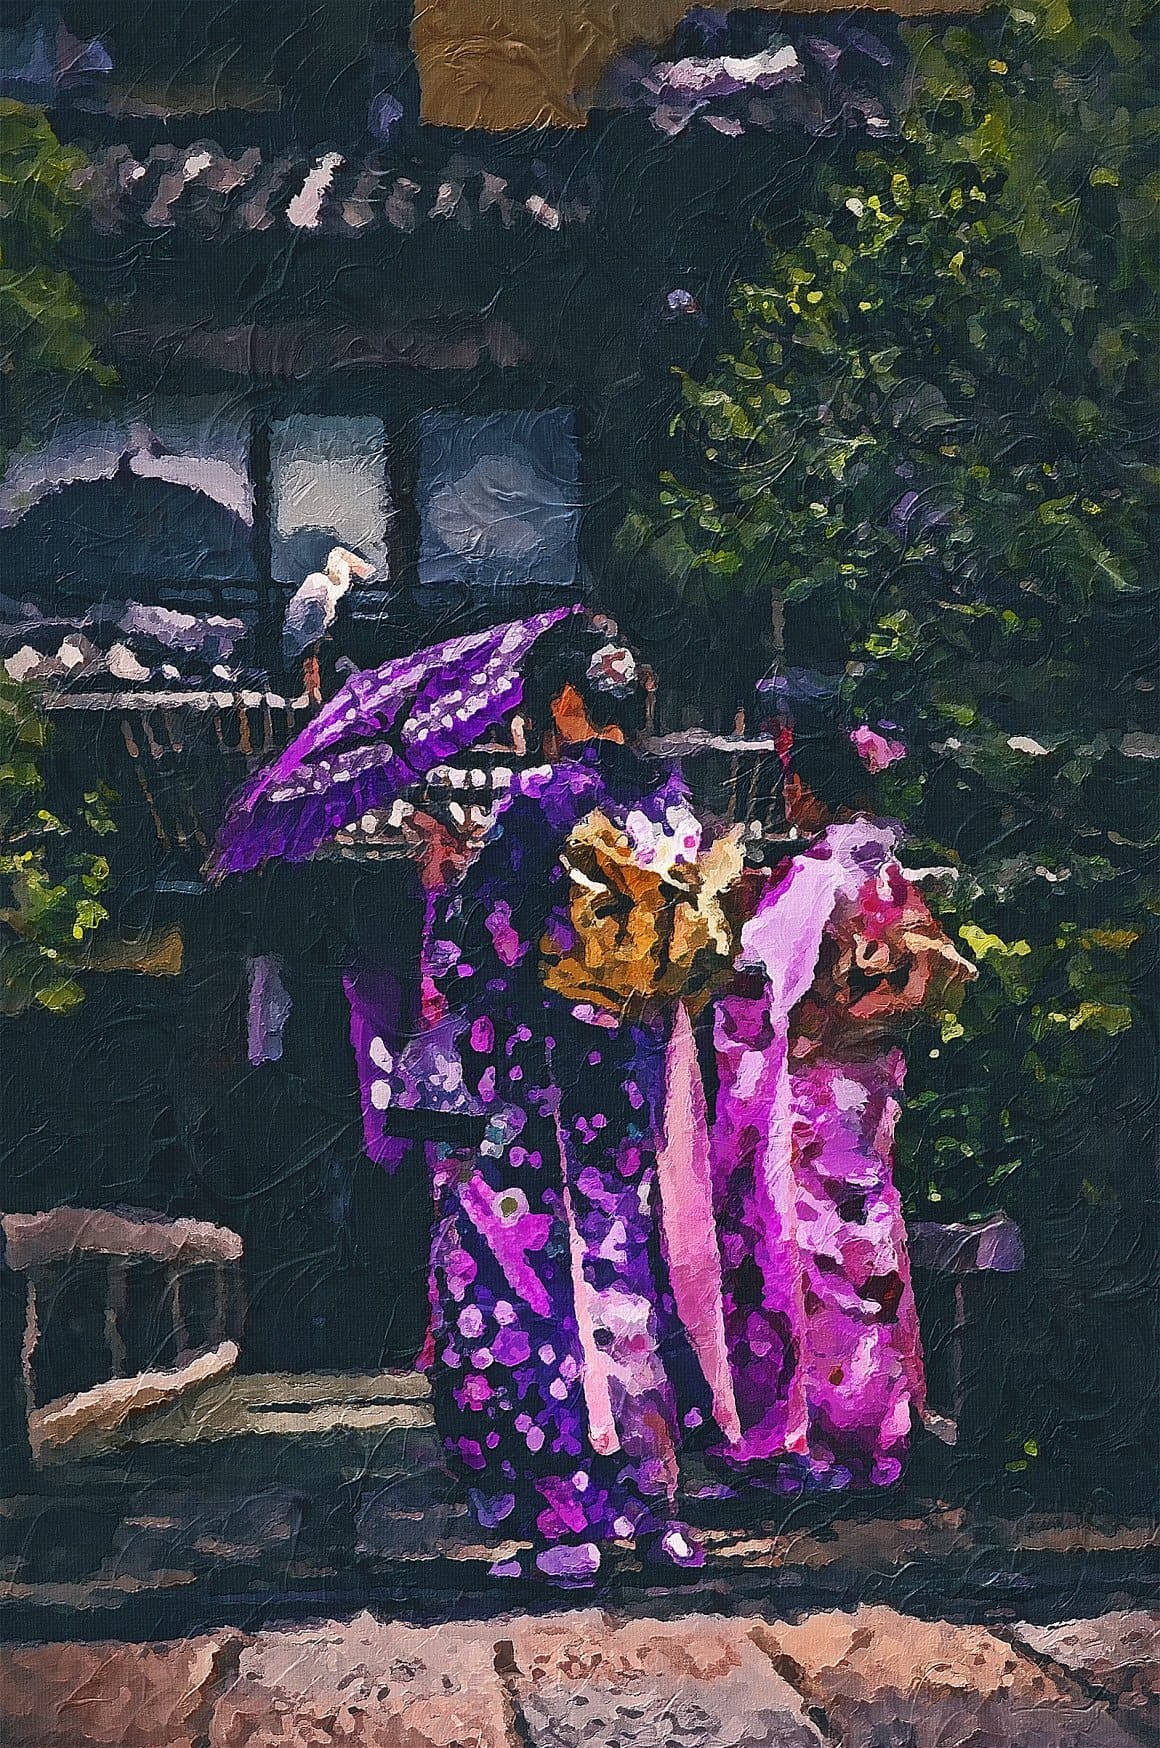 The image of a geisha in a purple and pink costume is reworked in Palette Knife Photoshop Action.